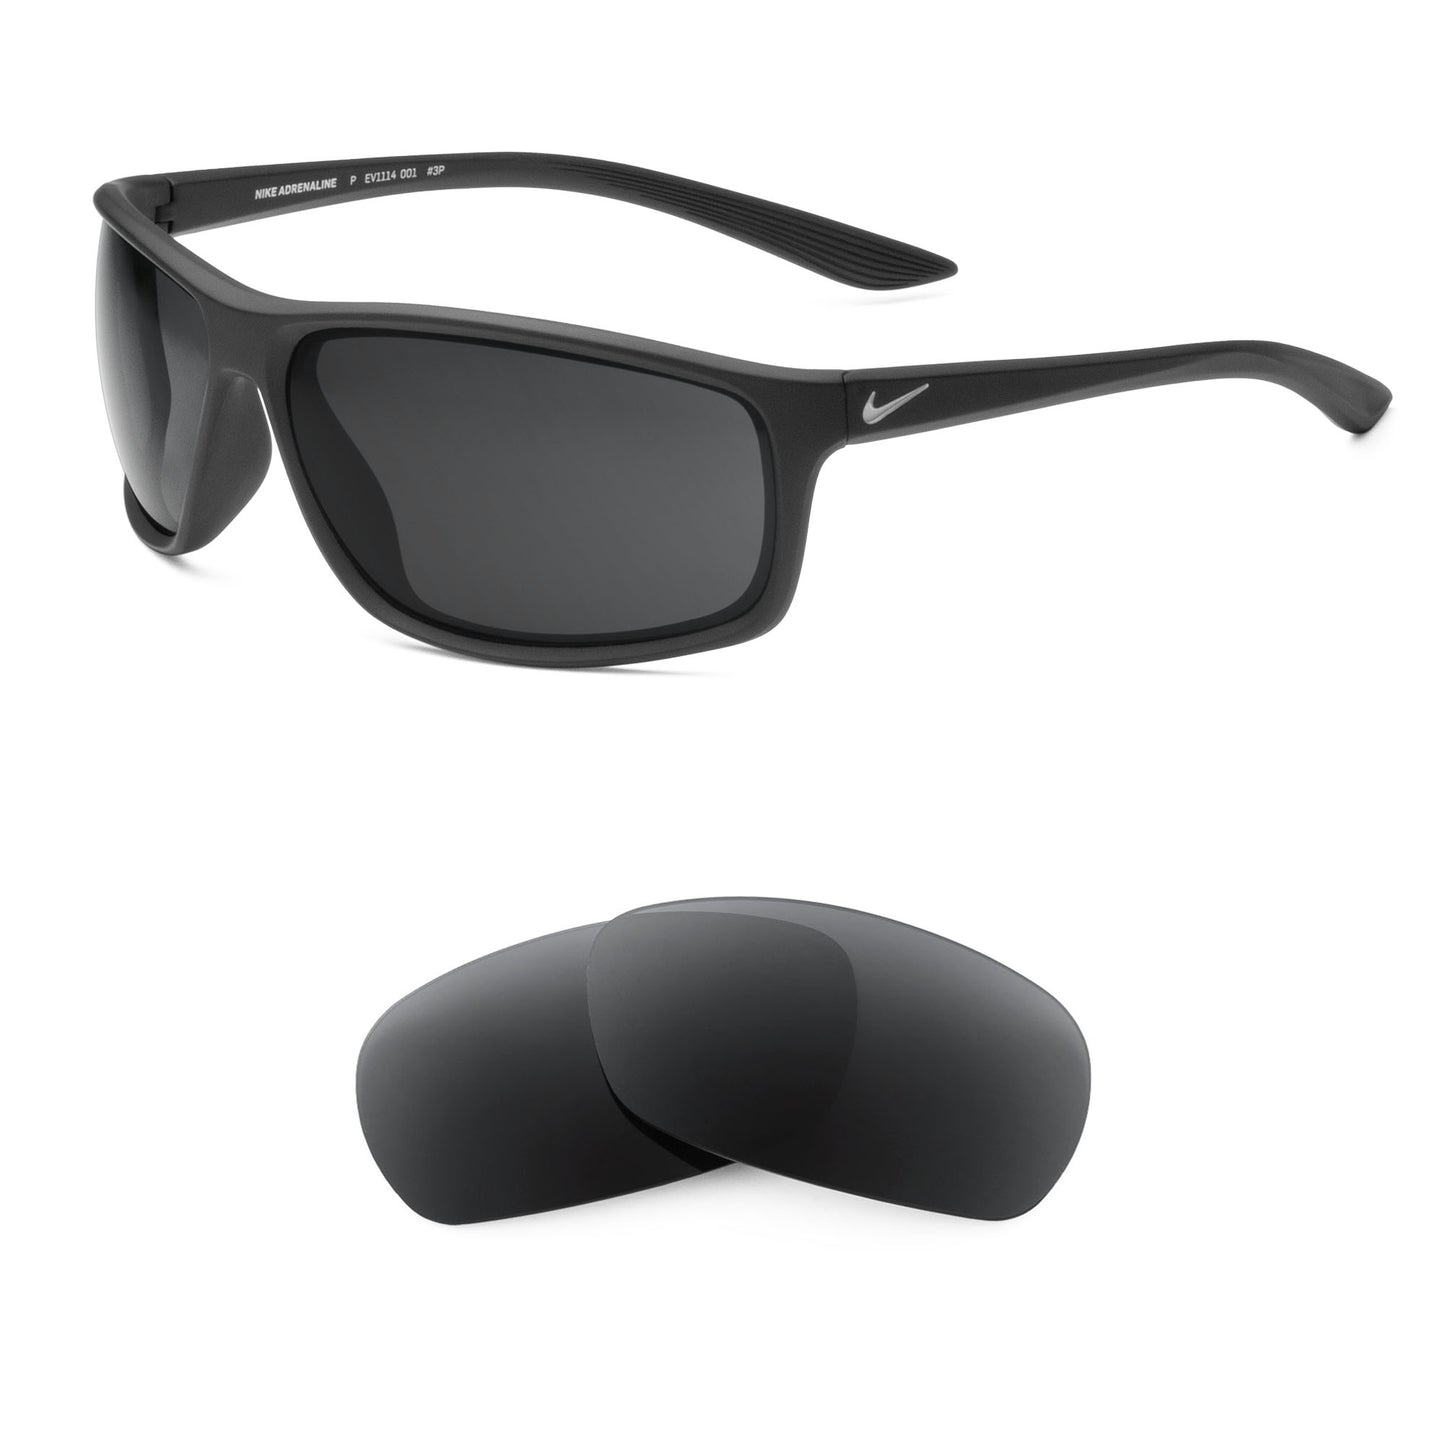 Nike Adrenaline 2 sunglasses with replacement lenses